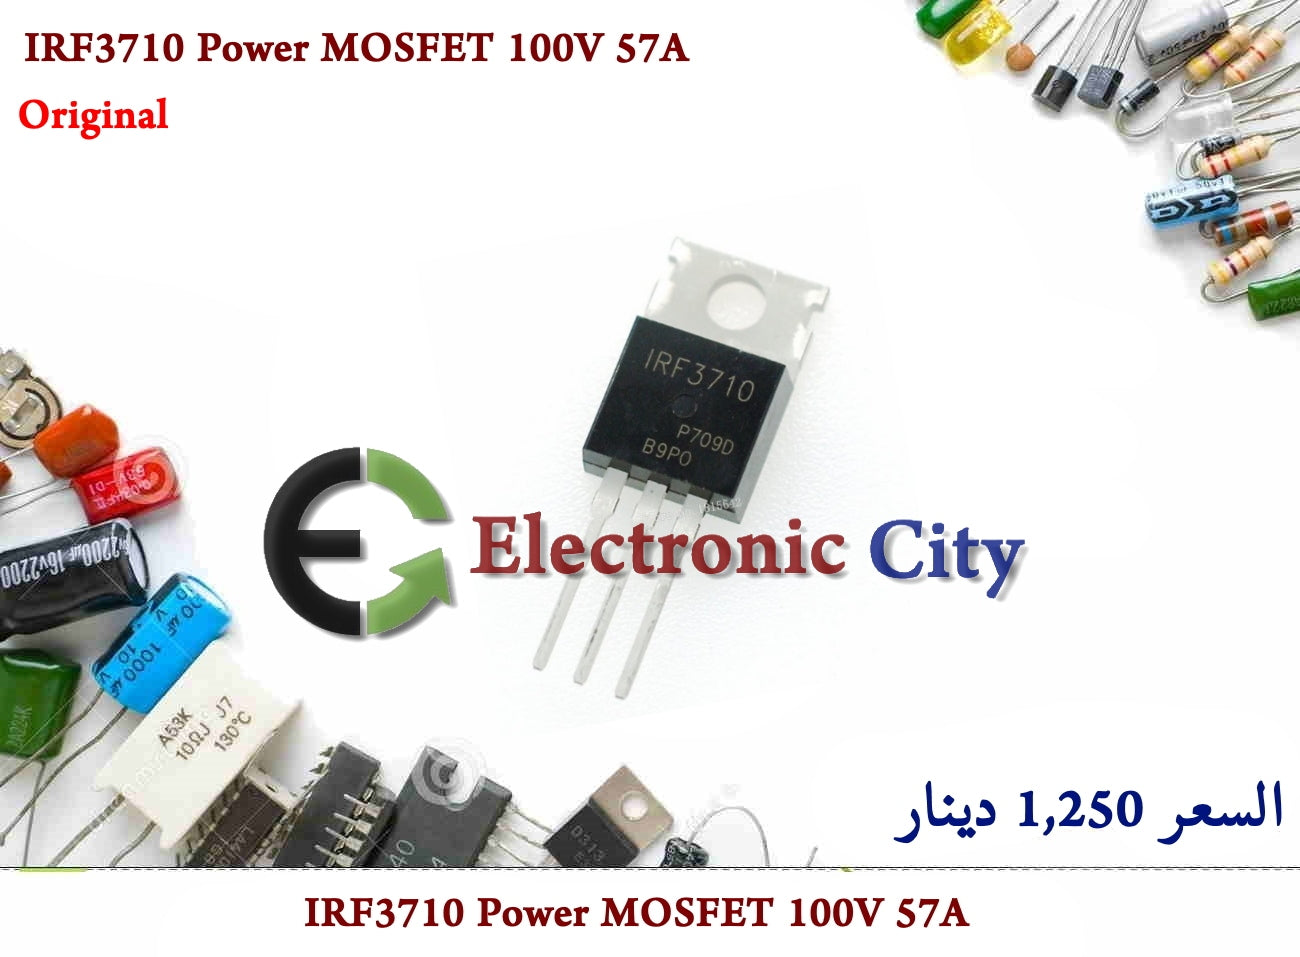 IRF3710 Power MOSFET 100V 57A